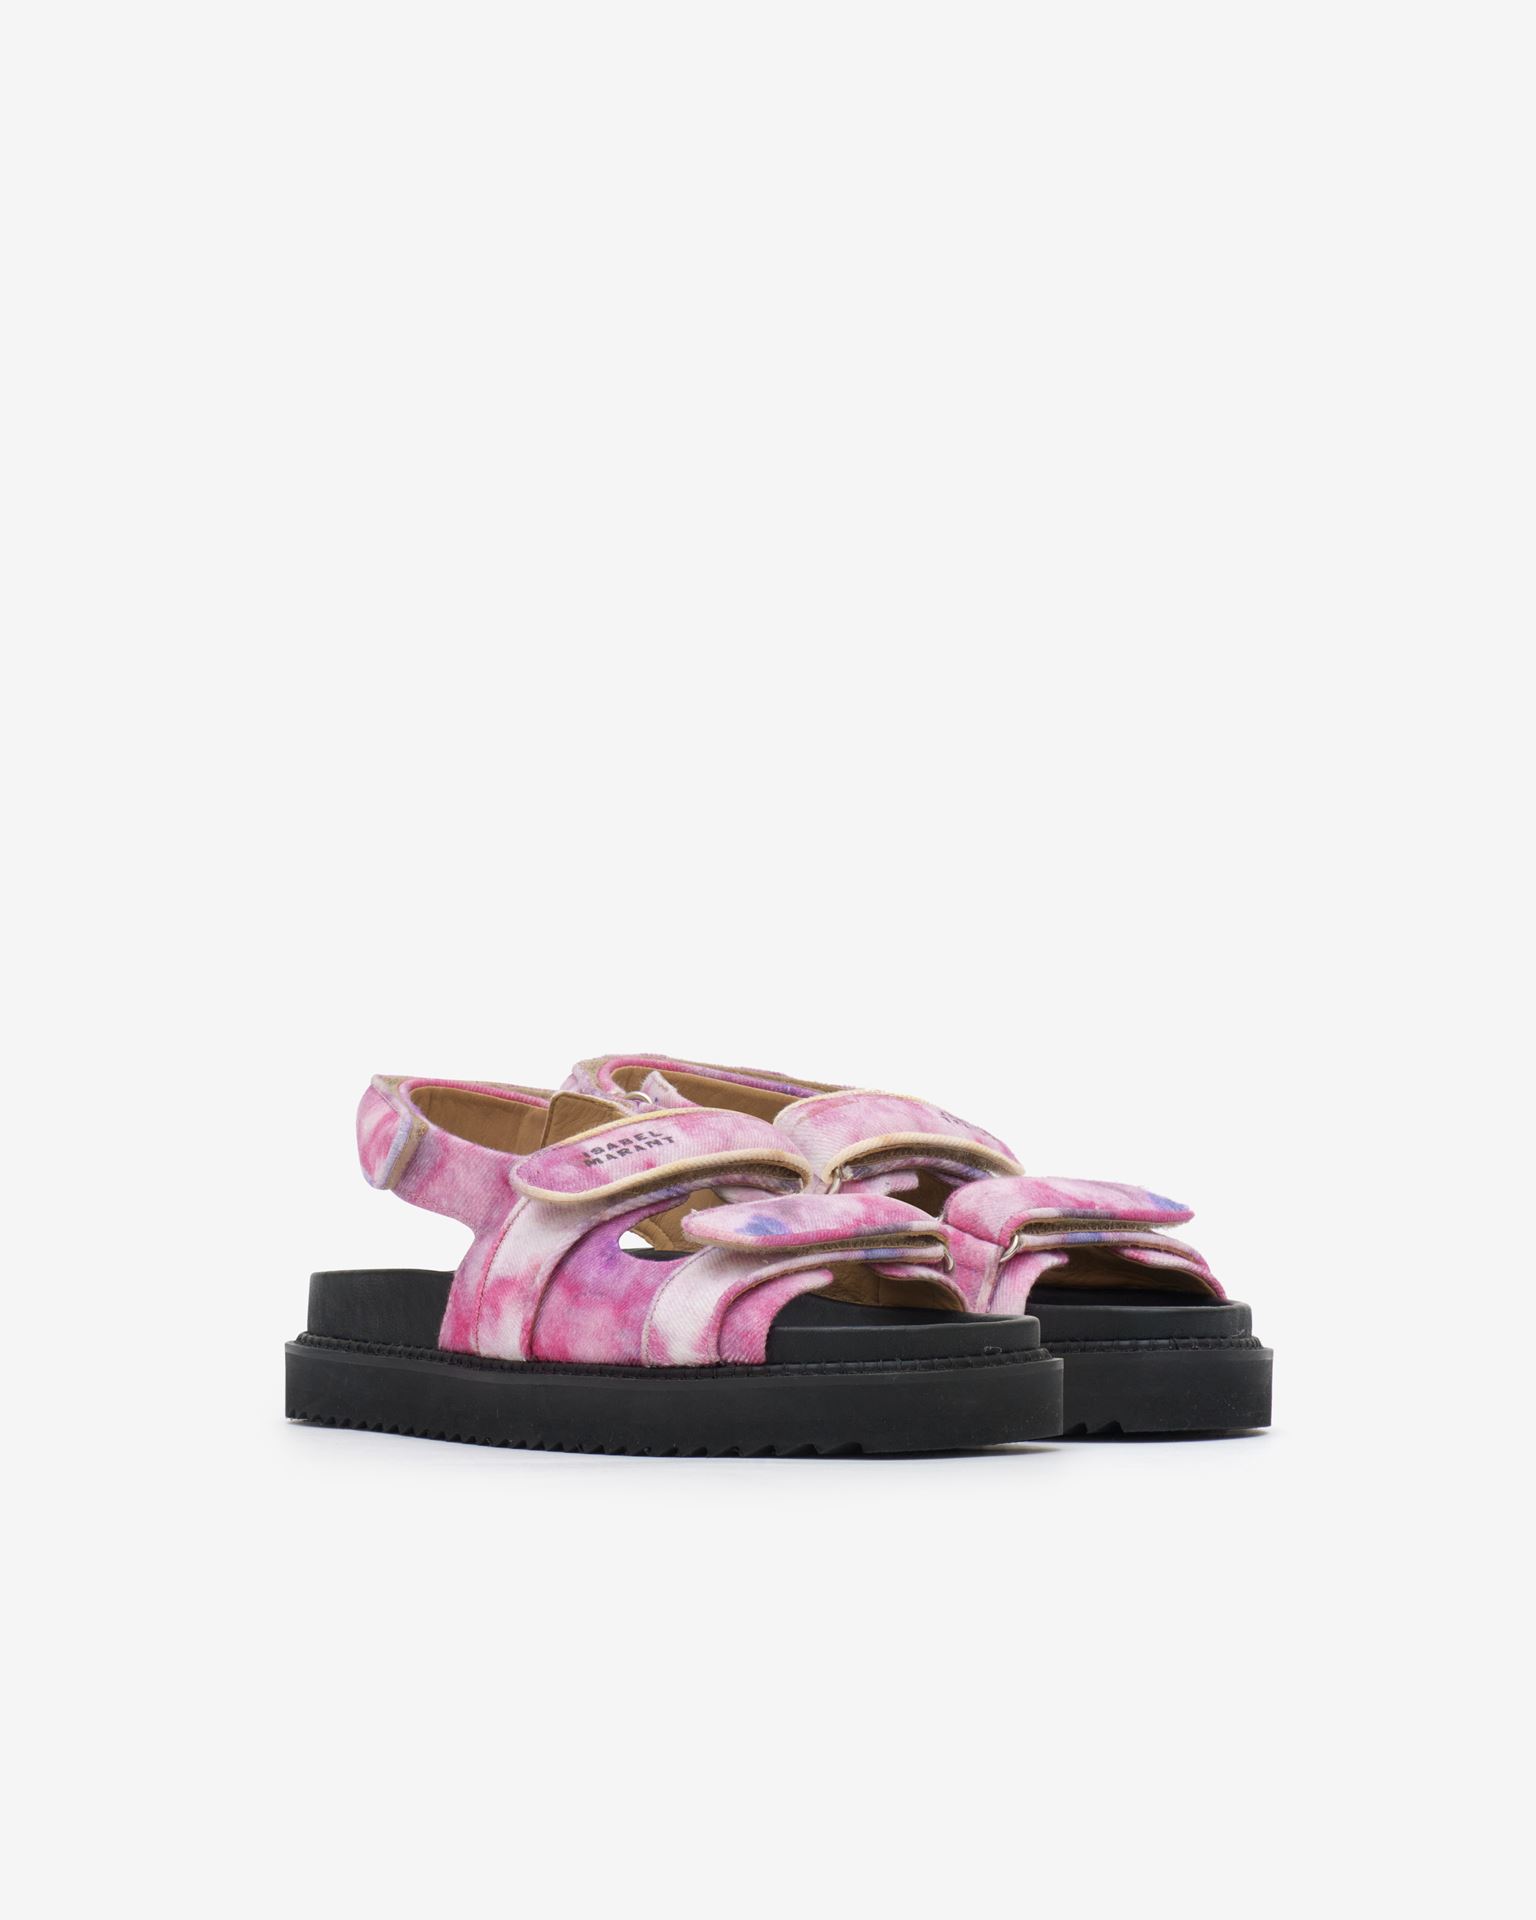 Isabel Marant, Madee Printed Sandals - Women - Pink